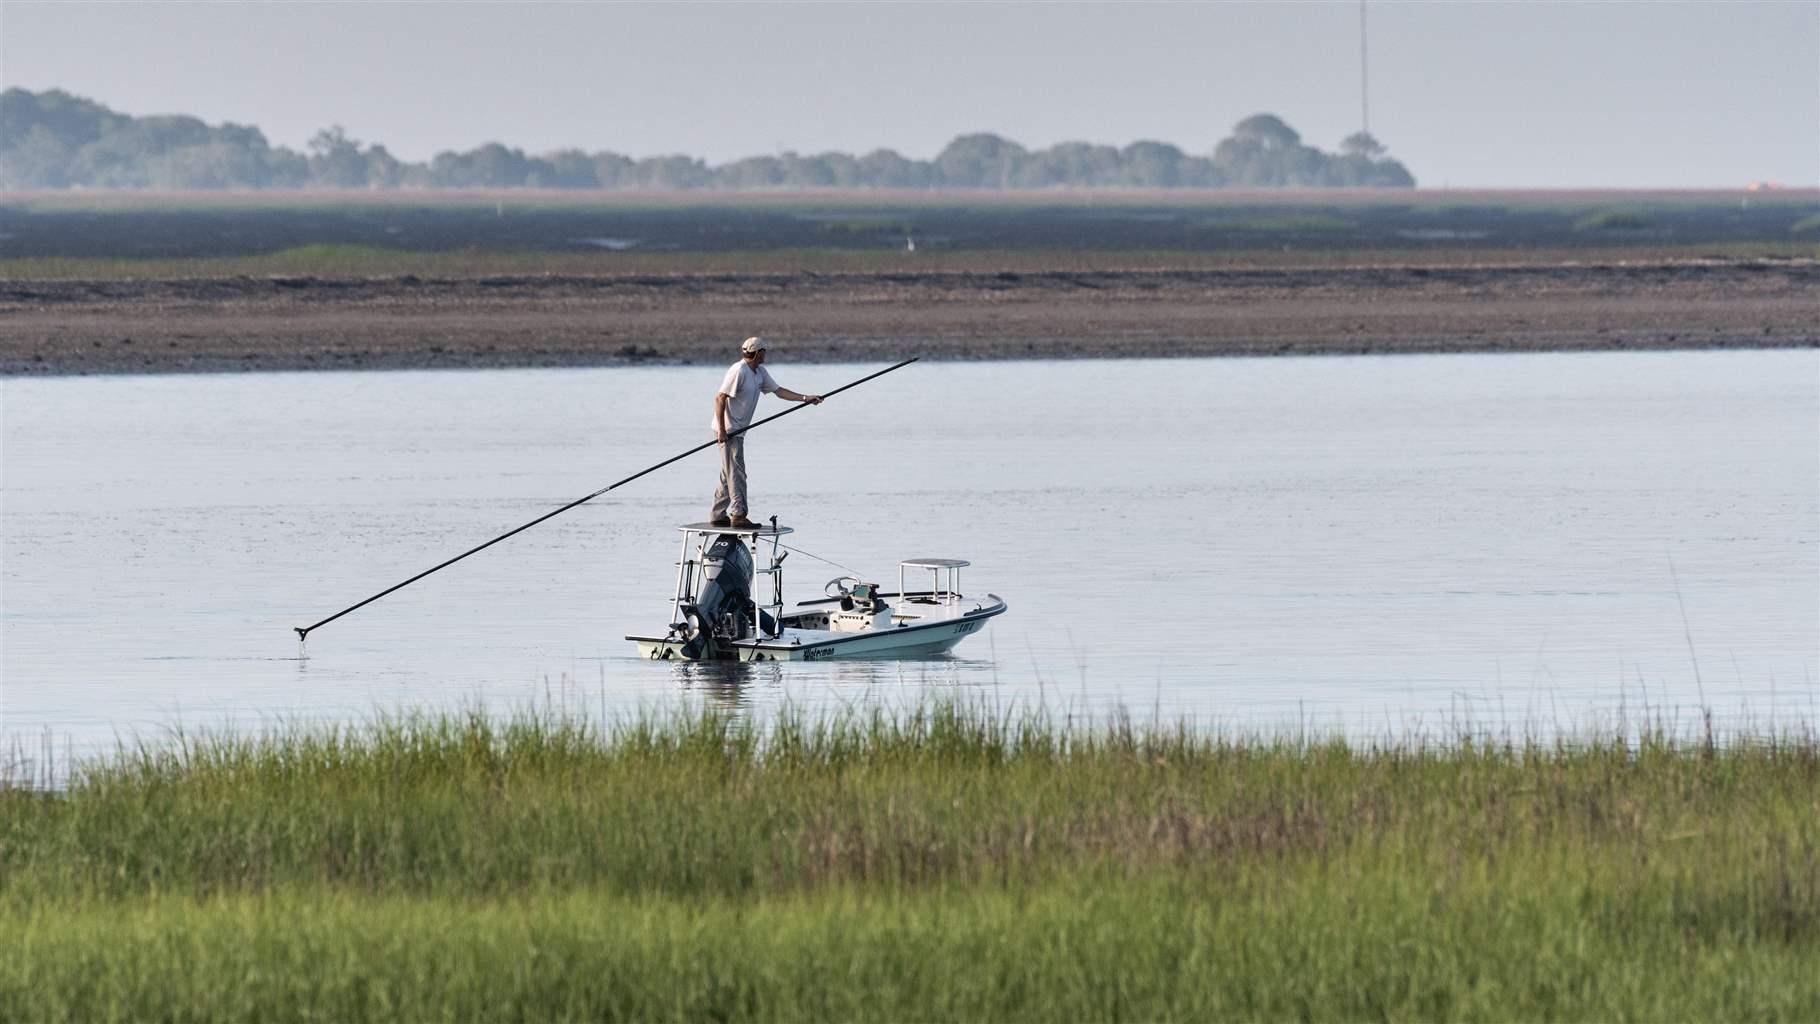 A man standing on an elevated platform on the back of a small, open-deck fishing boat uses a very long pole to push the boat through shallow waters in an area fringed by marsh grasses.